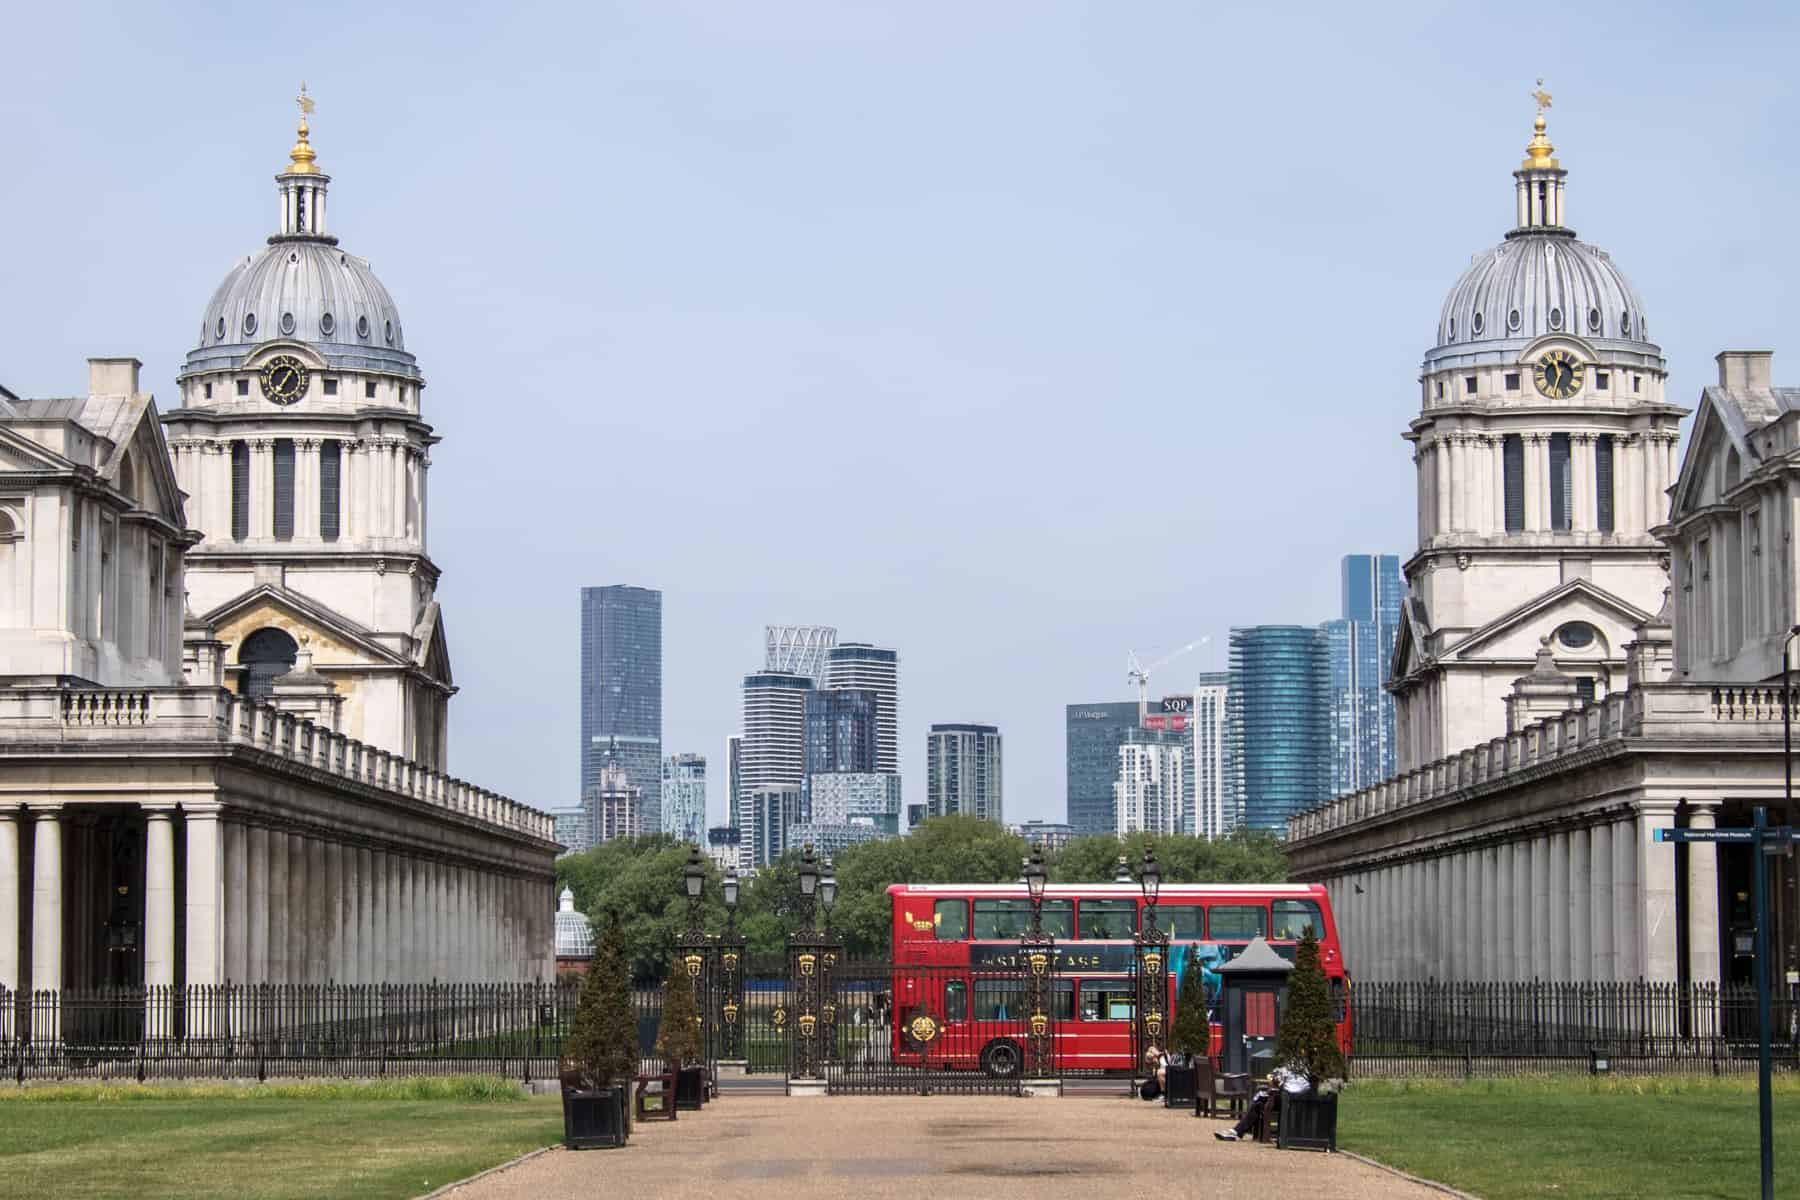 A red London buses drives between the two dome spires of the neo-classical Old Royal Naval College in Greenwich. Modern Canary Wharf can be seen in the background. 